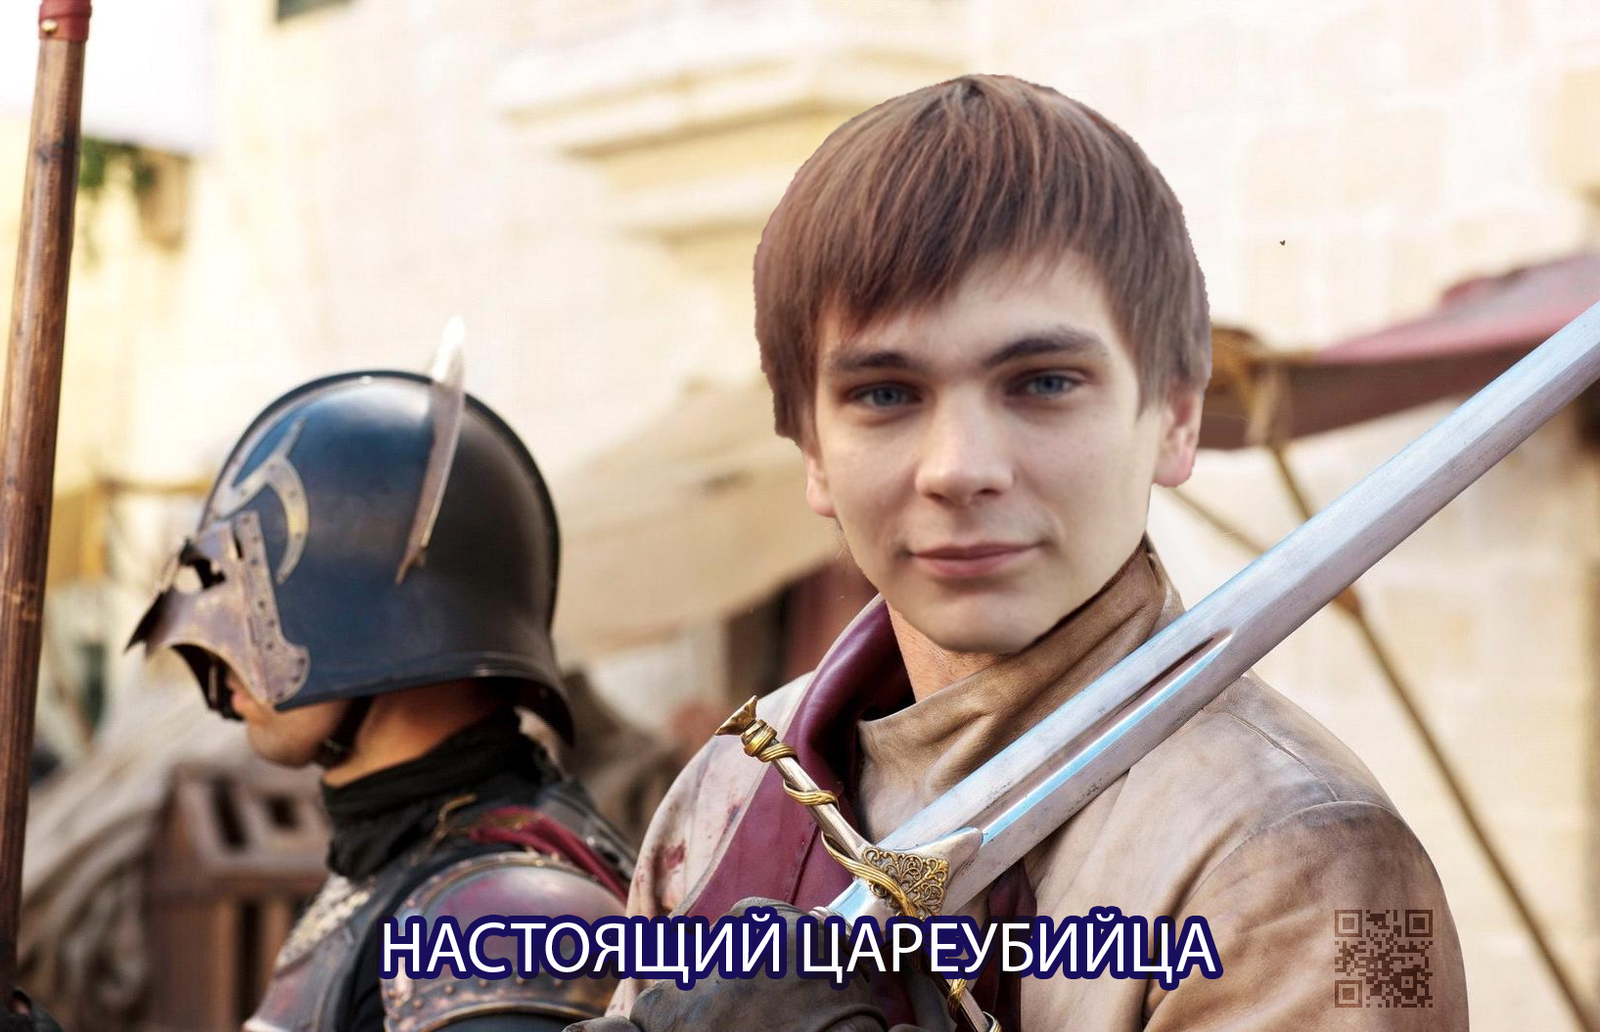 Jaime Festering - My, Game of Thrones, Rapper Purulent, Oxxxymiron, Oxxxymiron vs purulent, Versus, 